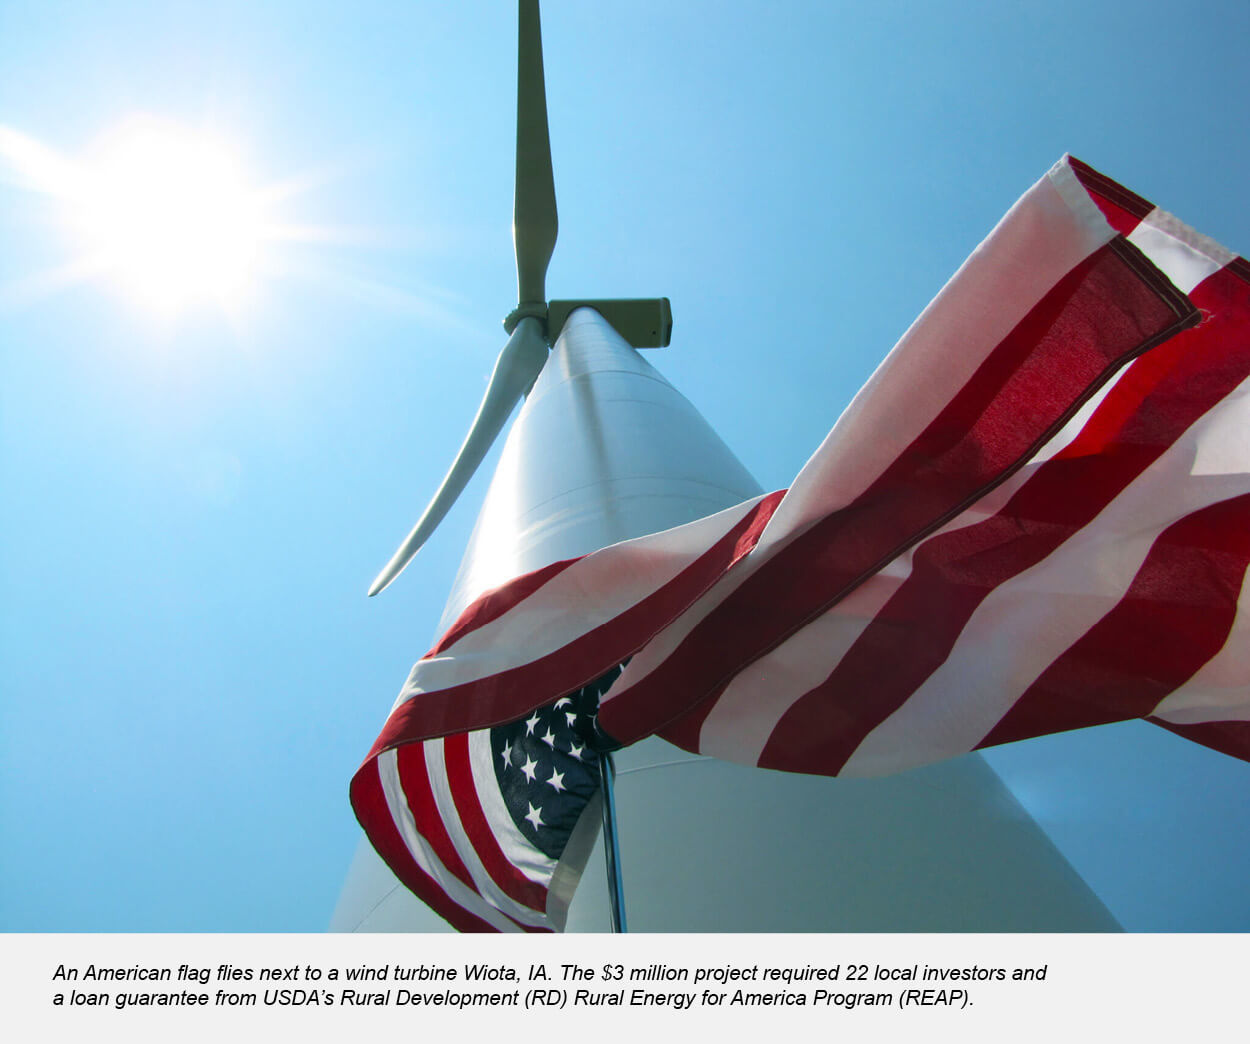 An American flag flies next to a wind turbine Wiota, IA. The $3 million project required 22 local investors and a loan guarantee from USDA’s Rural Dev